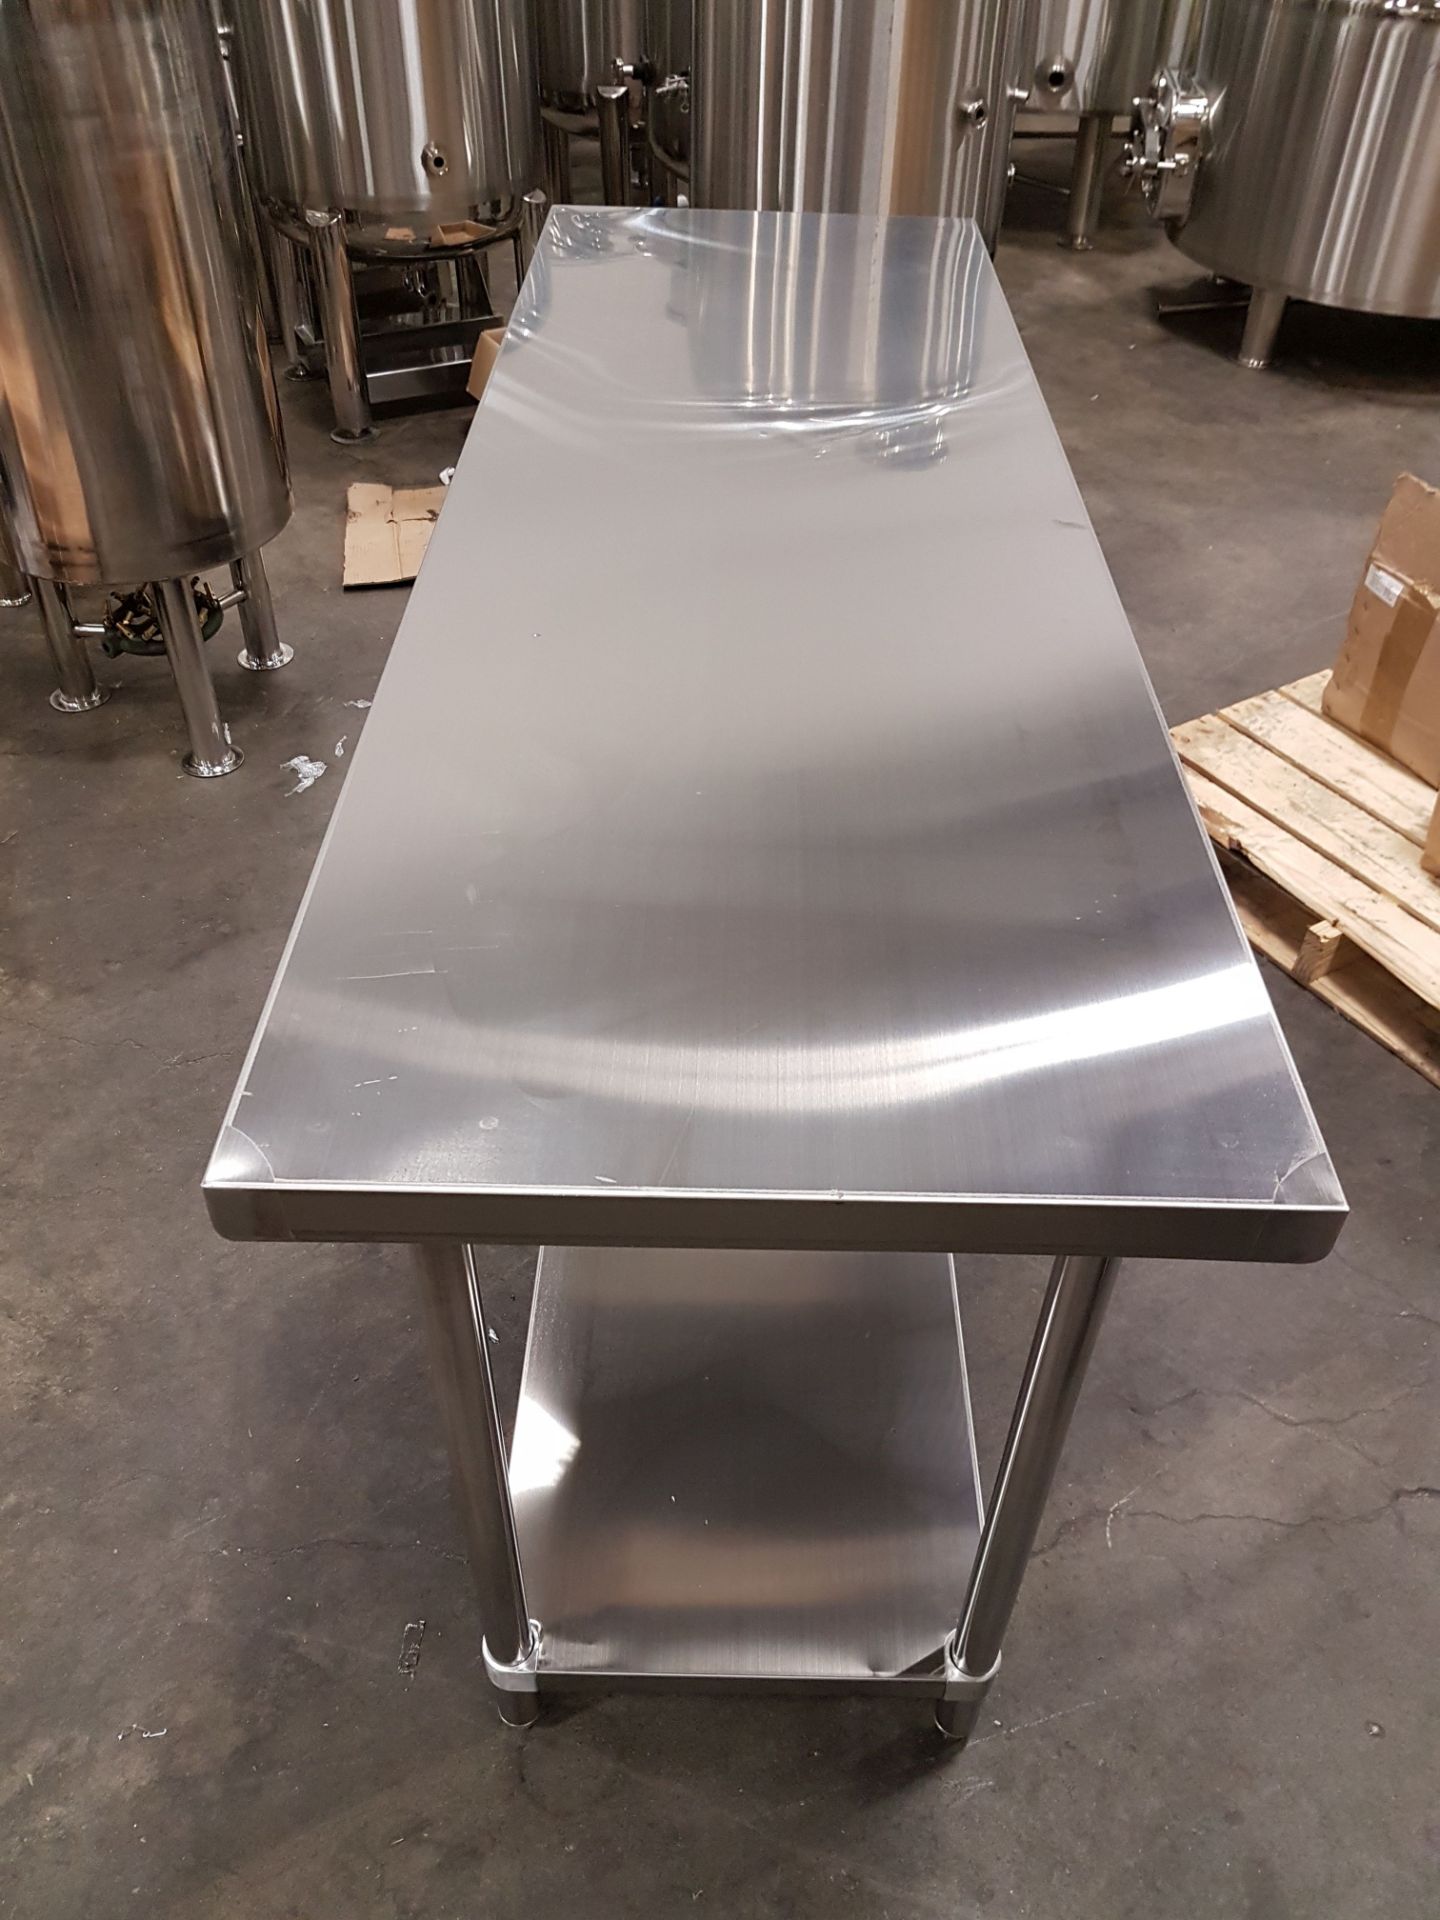 24" x 72" All Stainless Work Table - Image 2 of 4